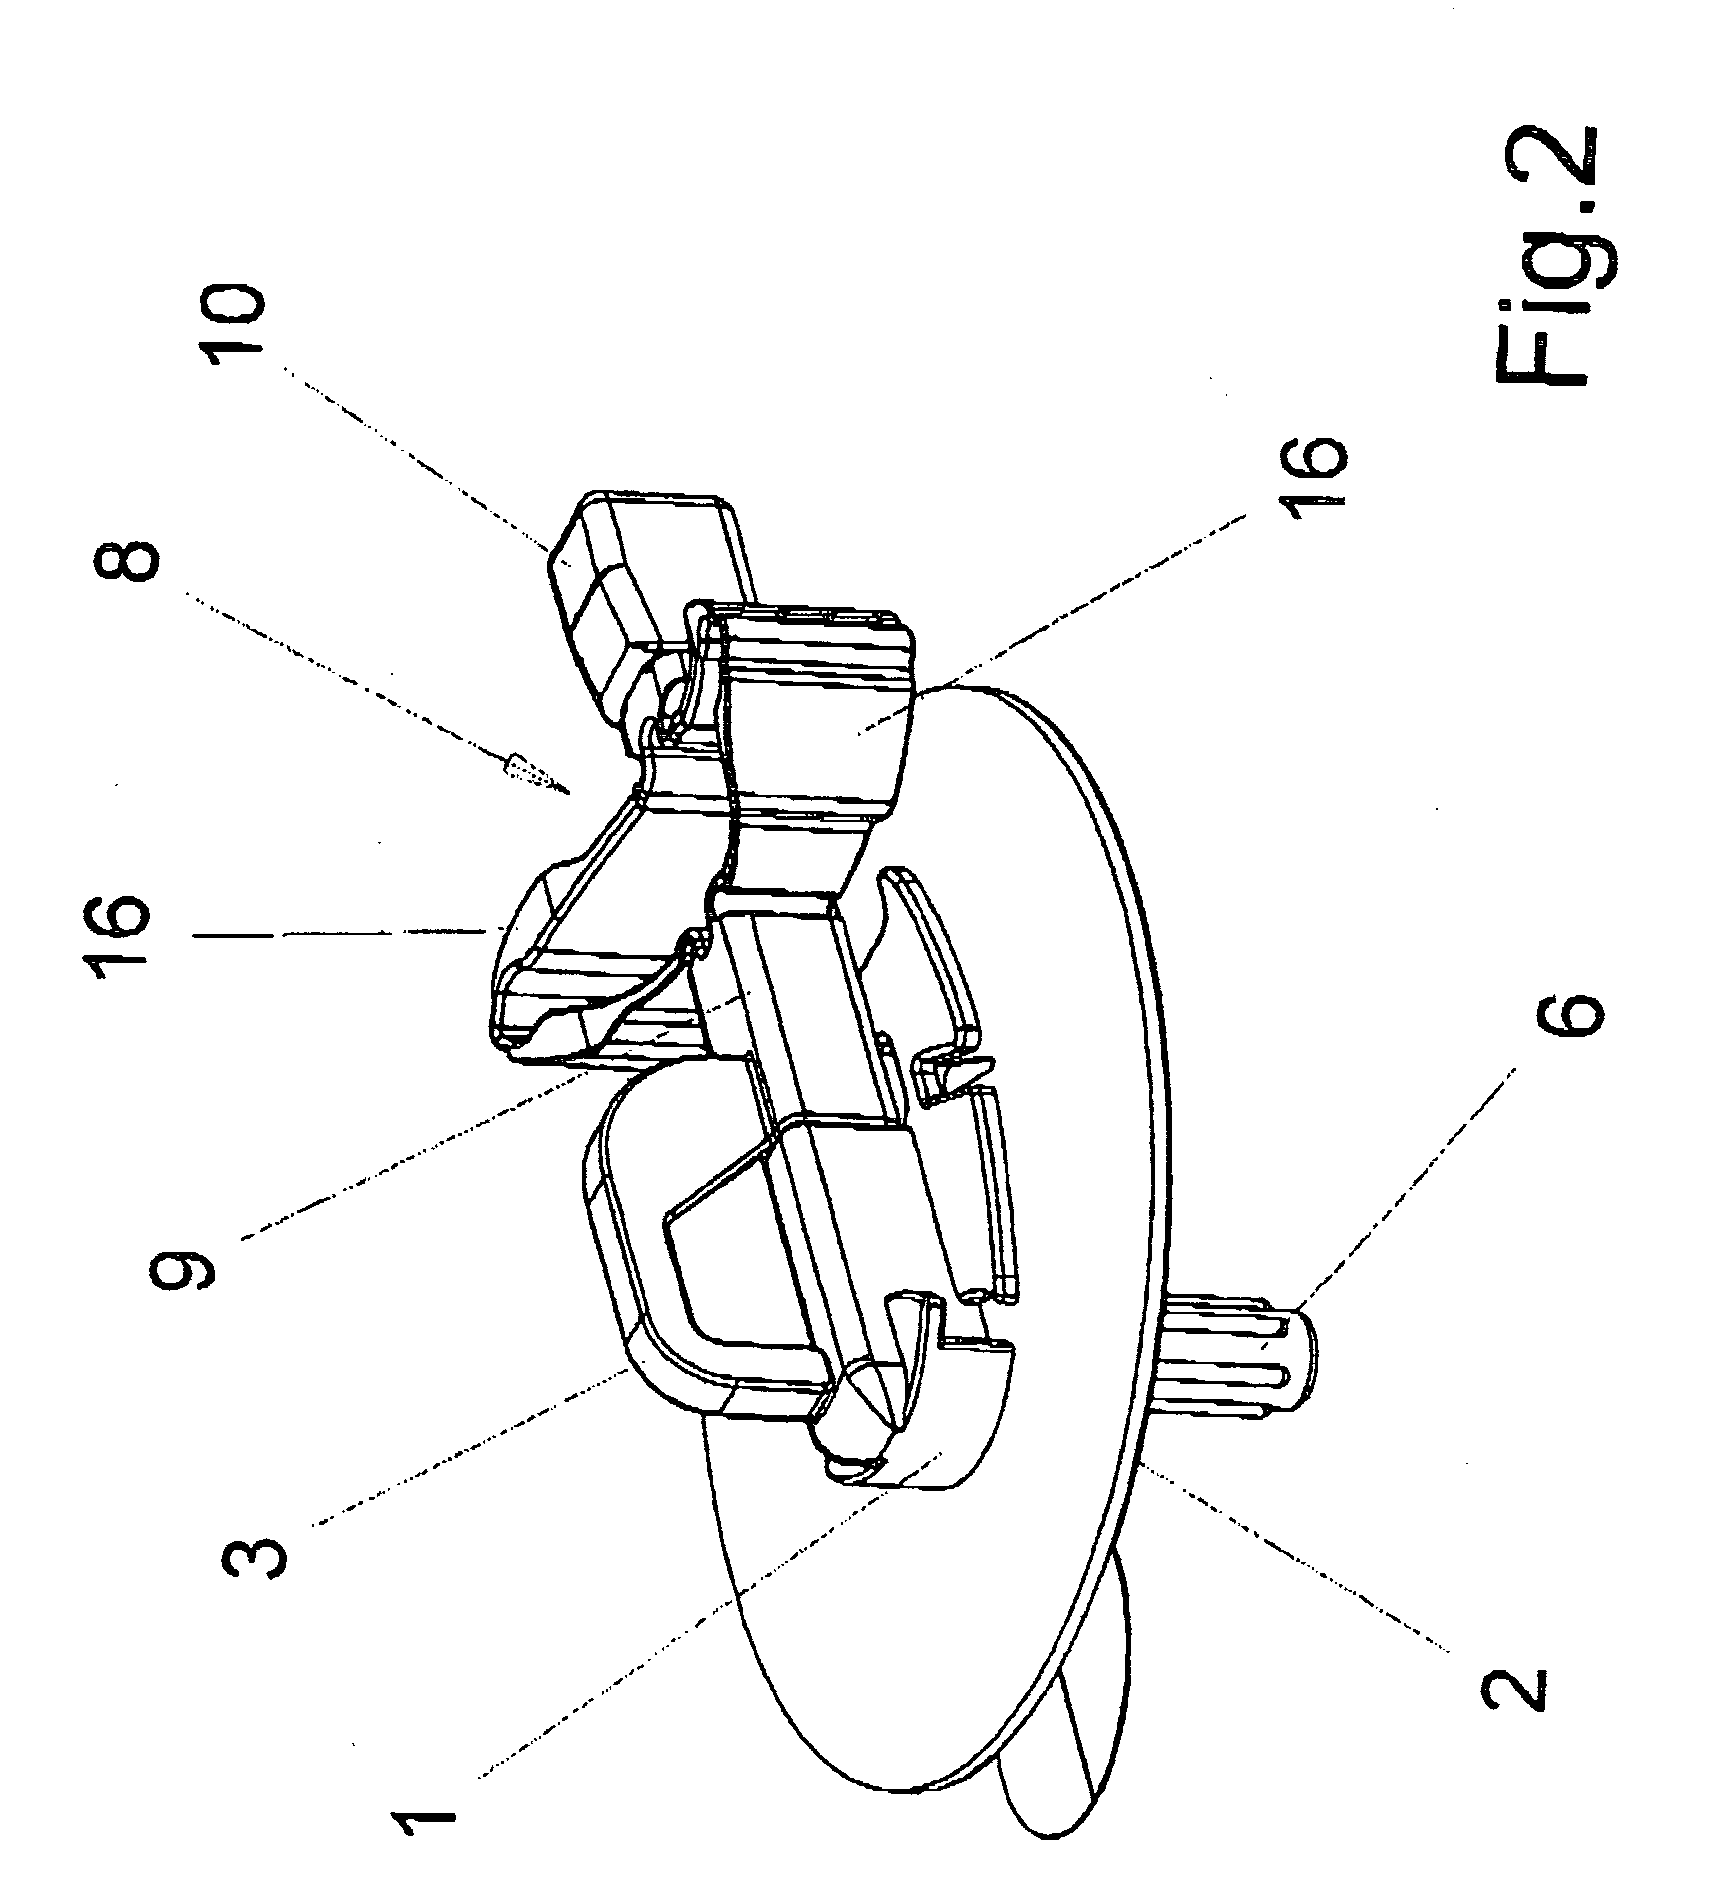 Puncture device with a flexible catheter tube for connecting to a medical infusion line